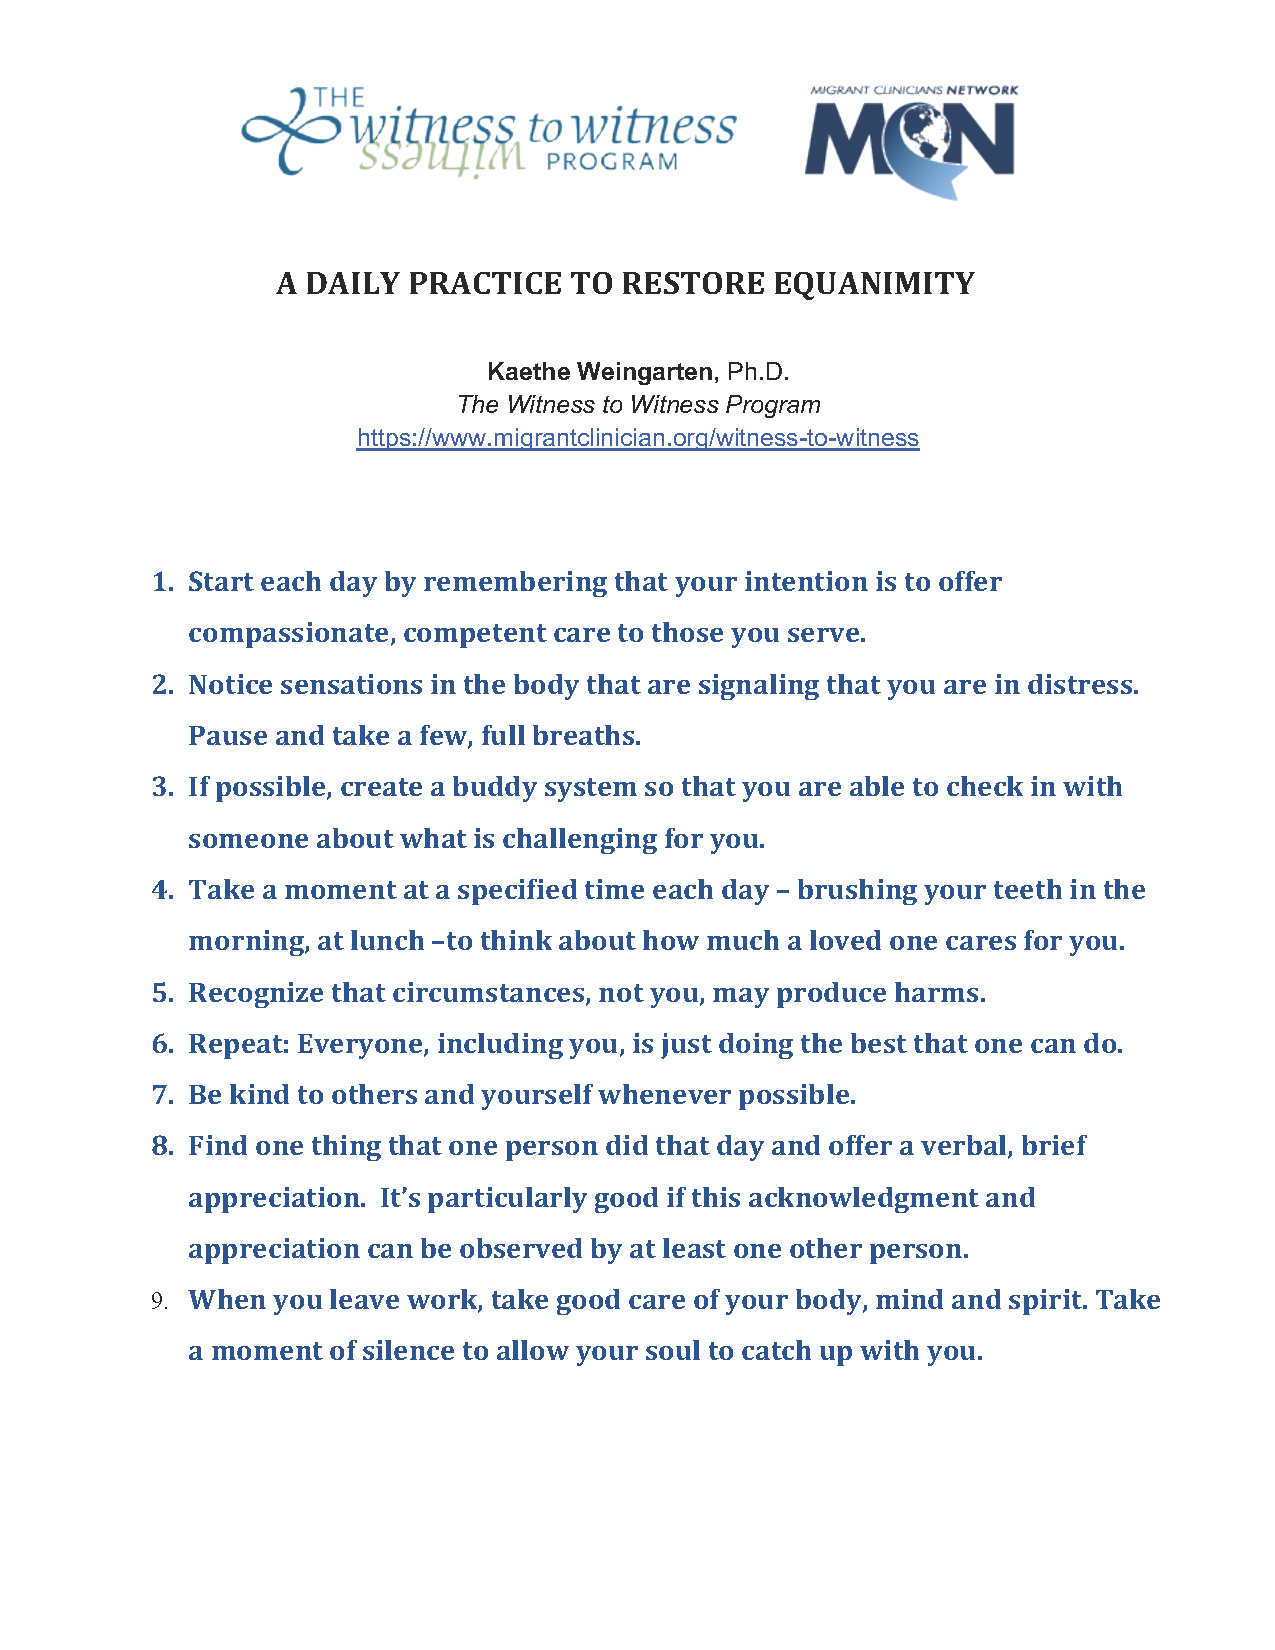 A Daily Practice to Restore Equanimity